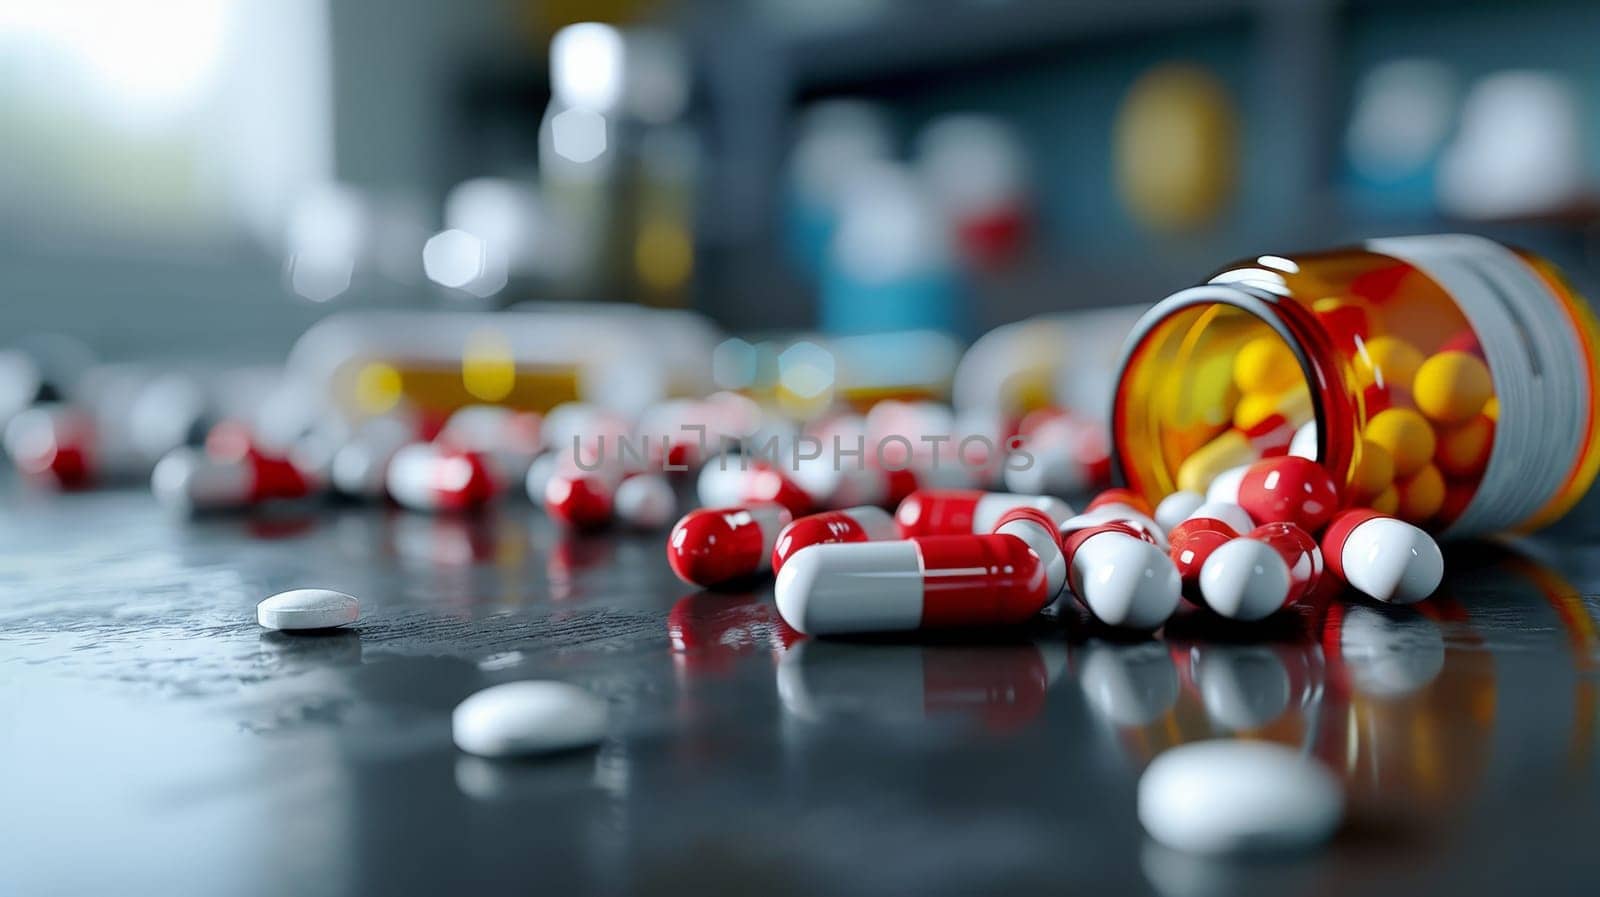 A bottle of pills is on a table with many pills scattered around it. The pills are red and white, and the bottle is almost empty